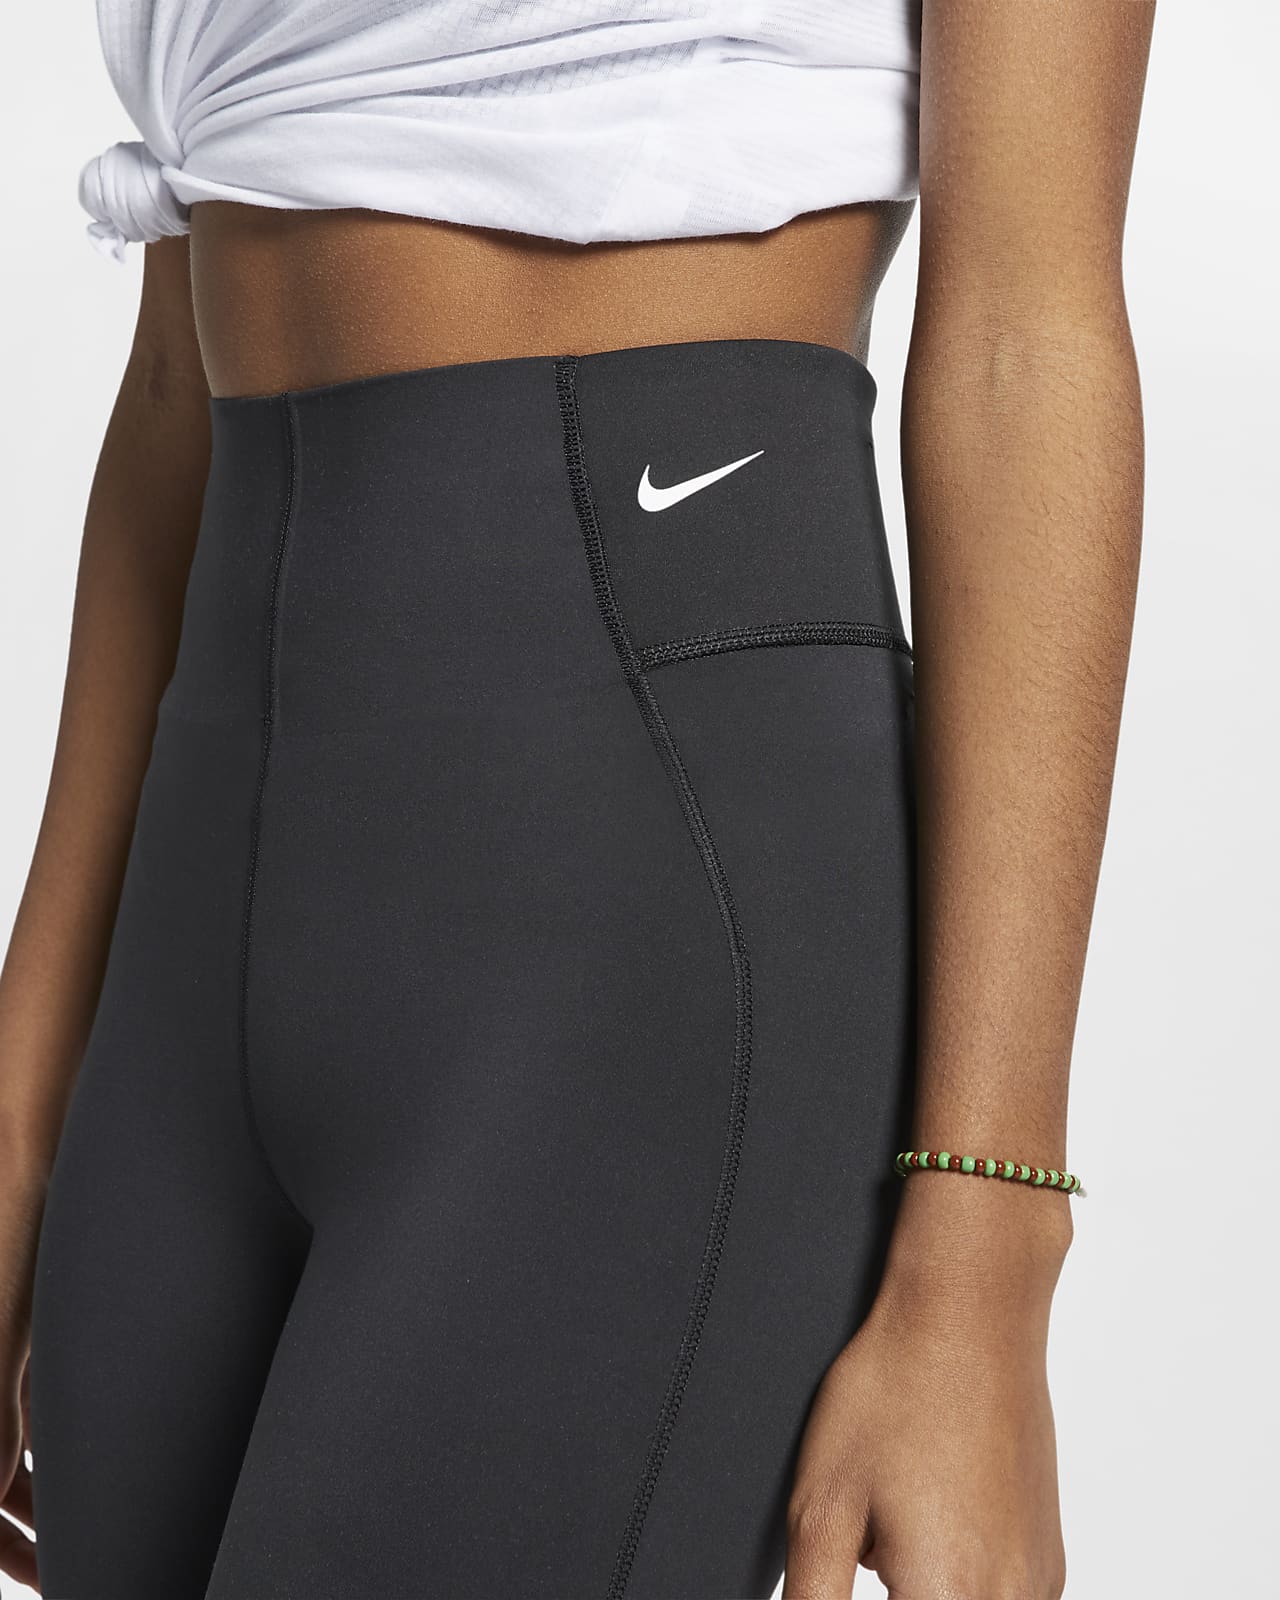 nike women's sculpt victory training tights